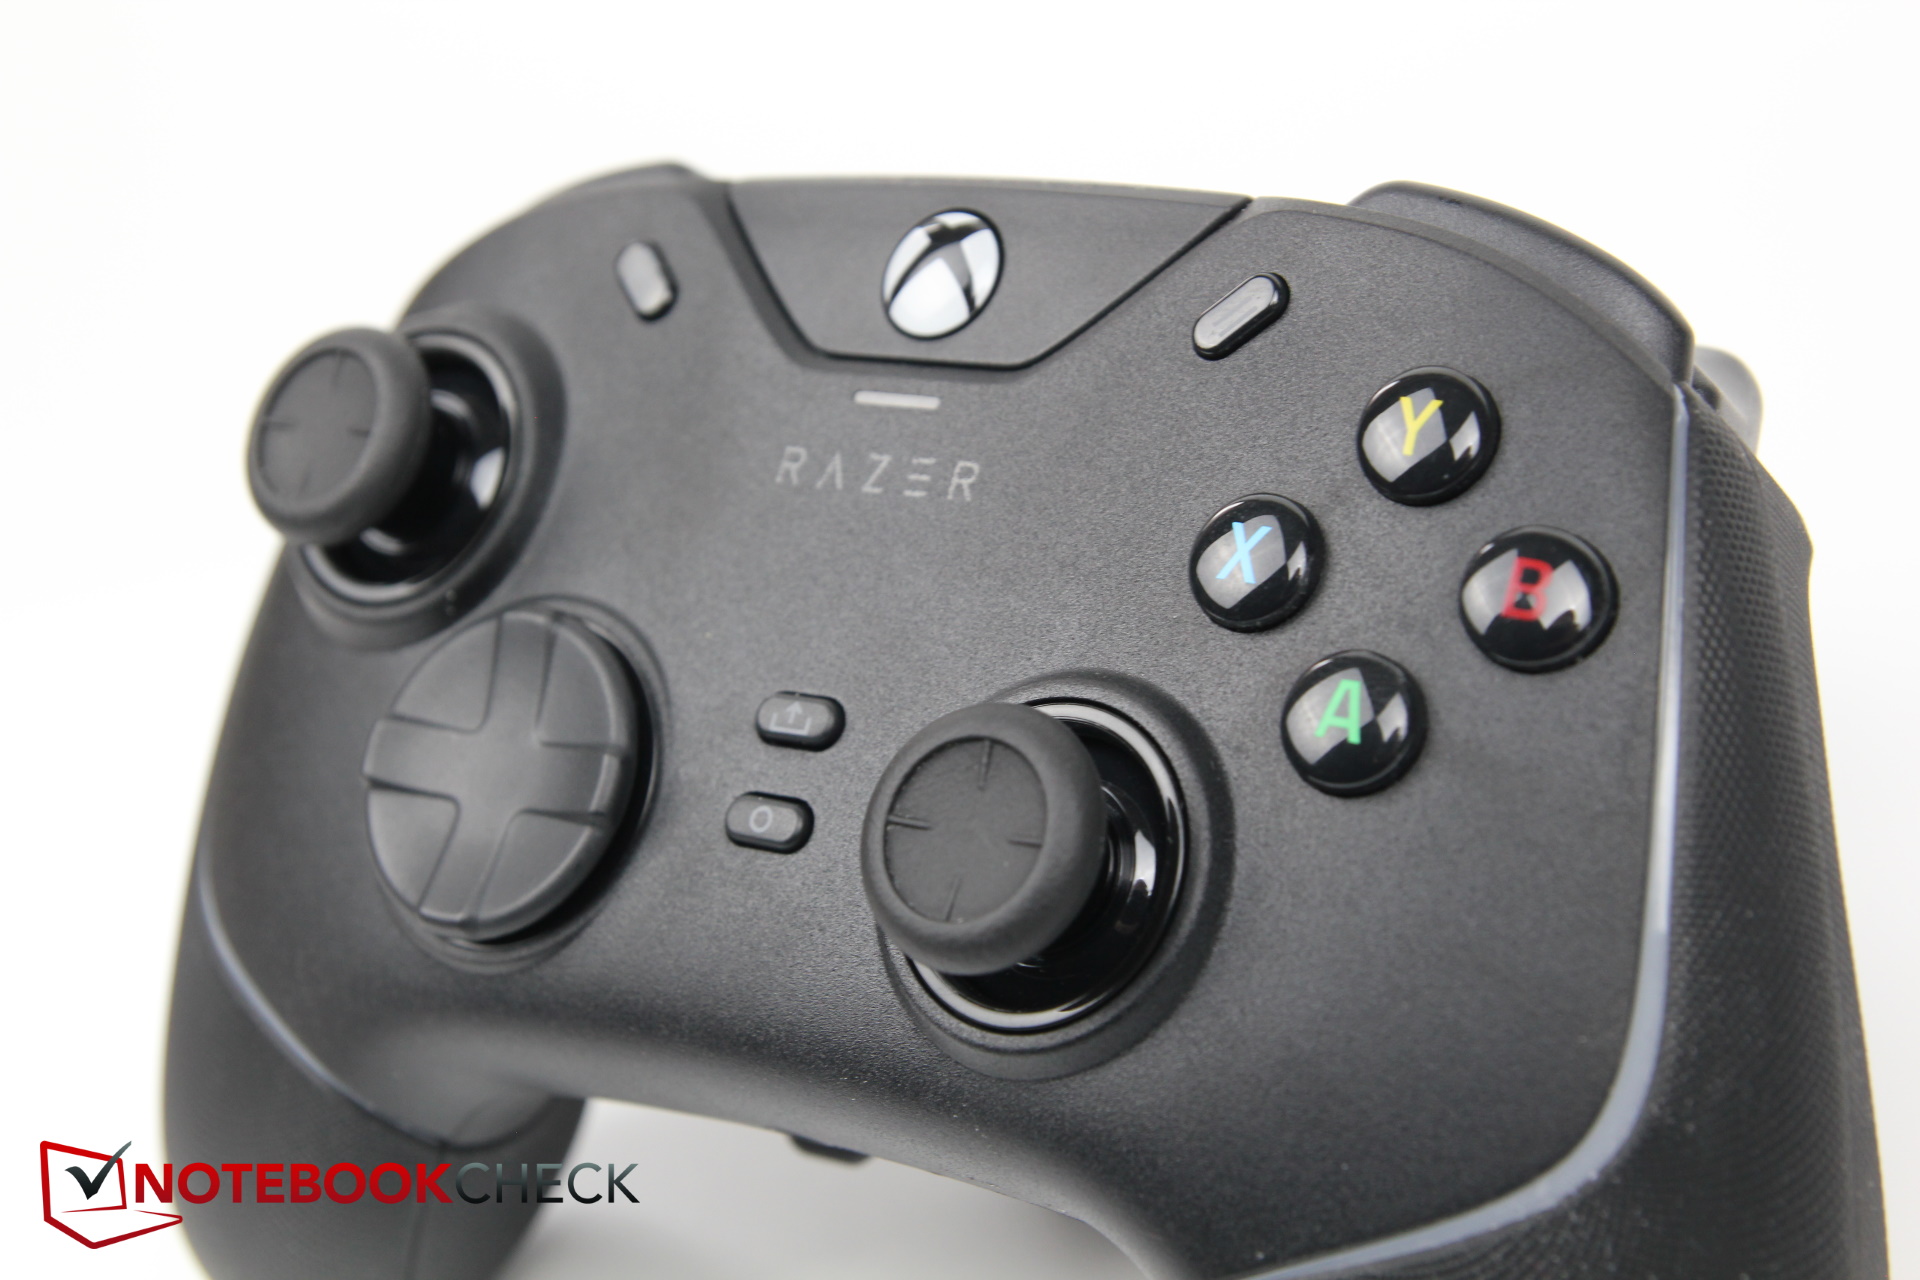 Razer Wolverine V2 Chroma hands-on: Extravagant gamepad with mechanical  buttons - NotebookCheck.net Reviews